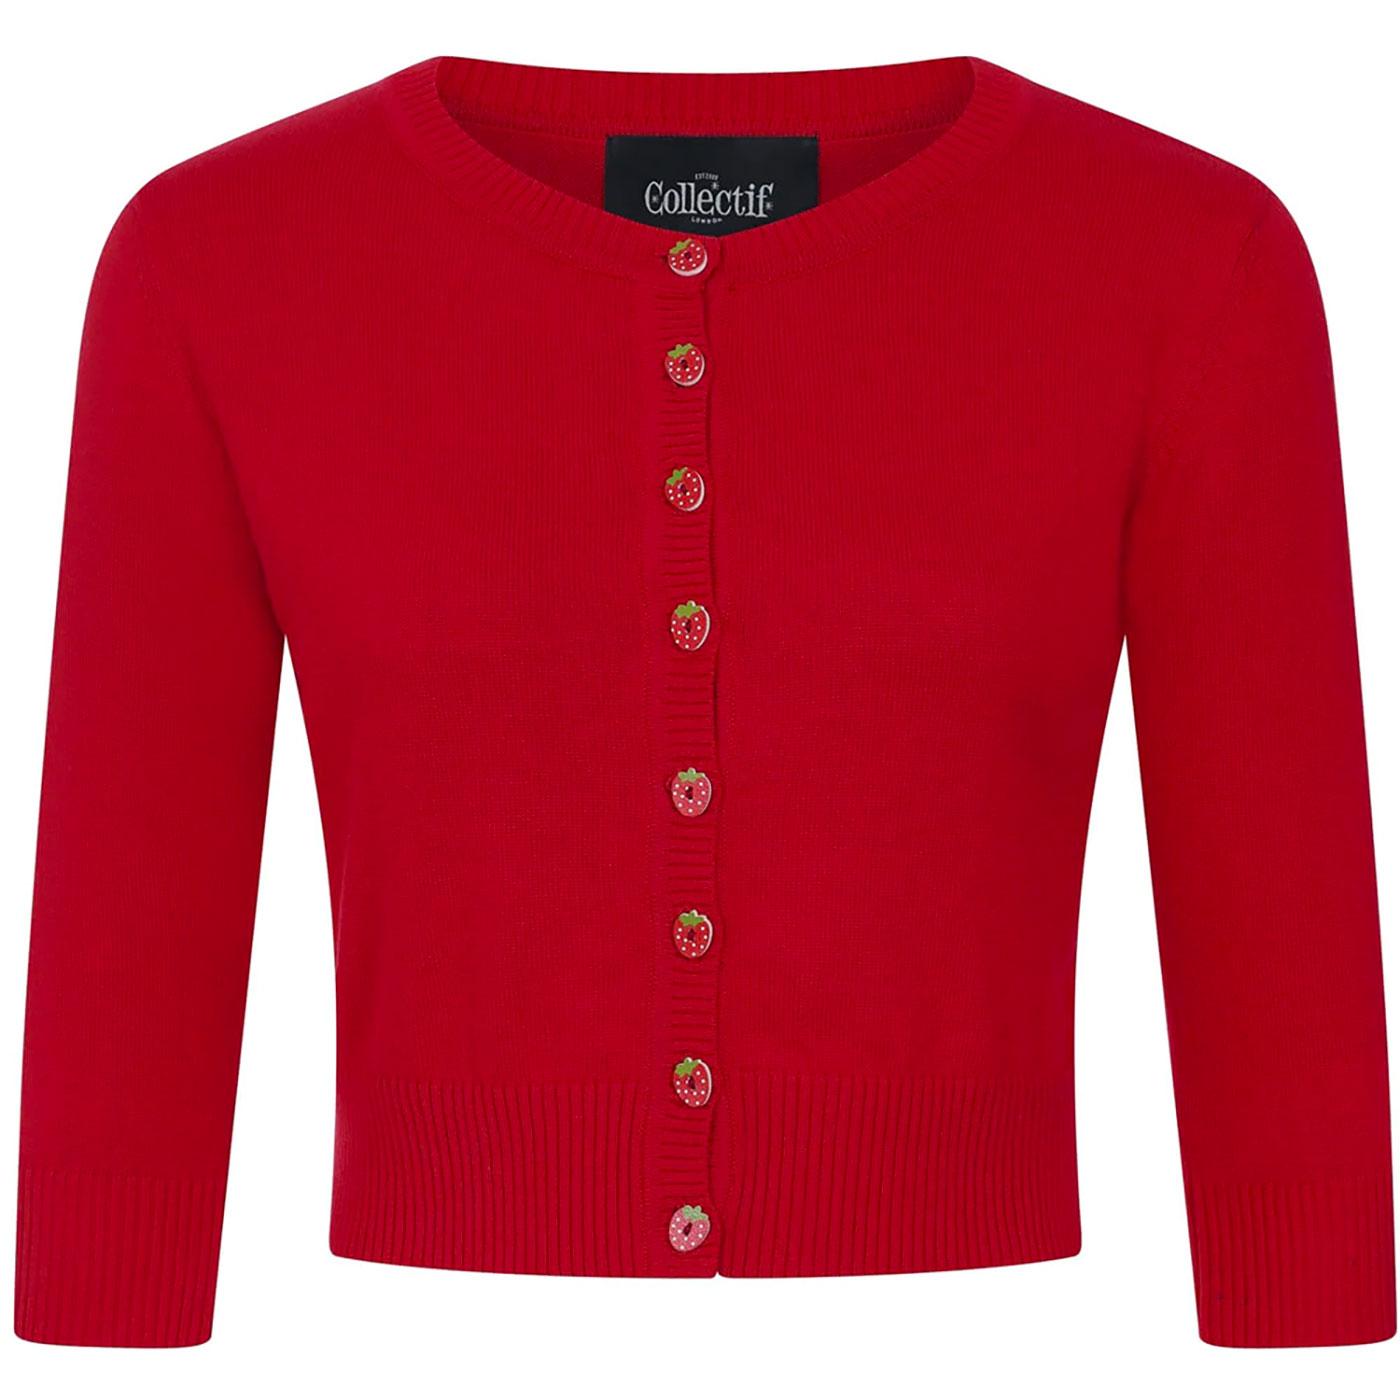 Lucy COLLECTIF Retro 1950s Strawberry Cardigan